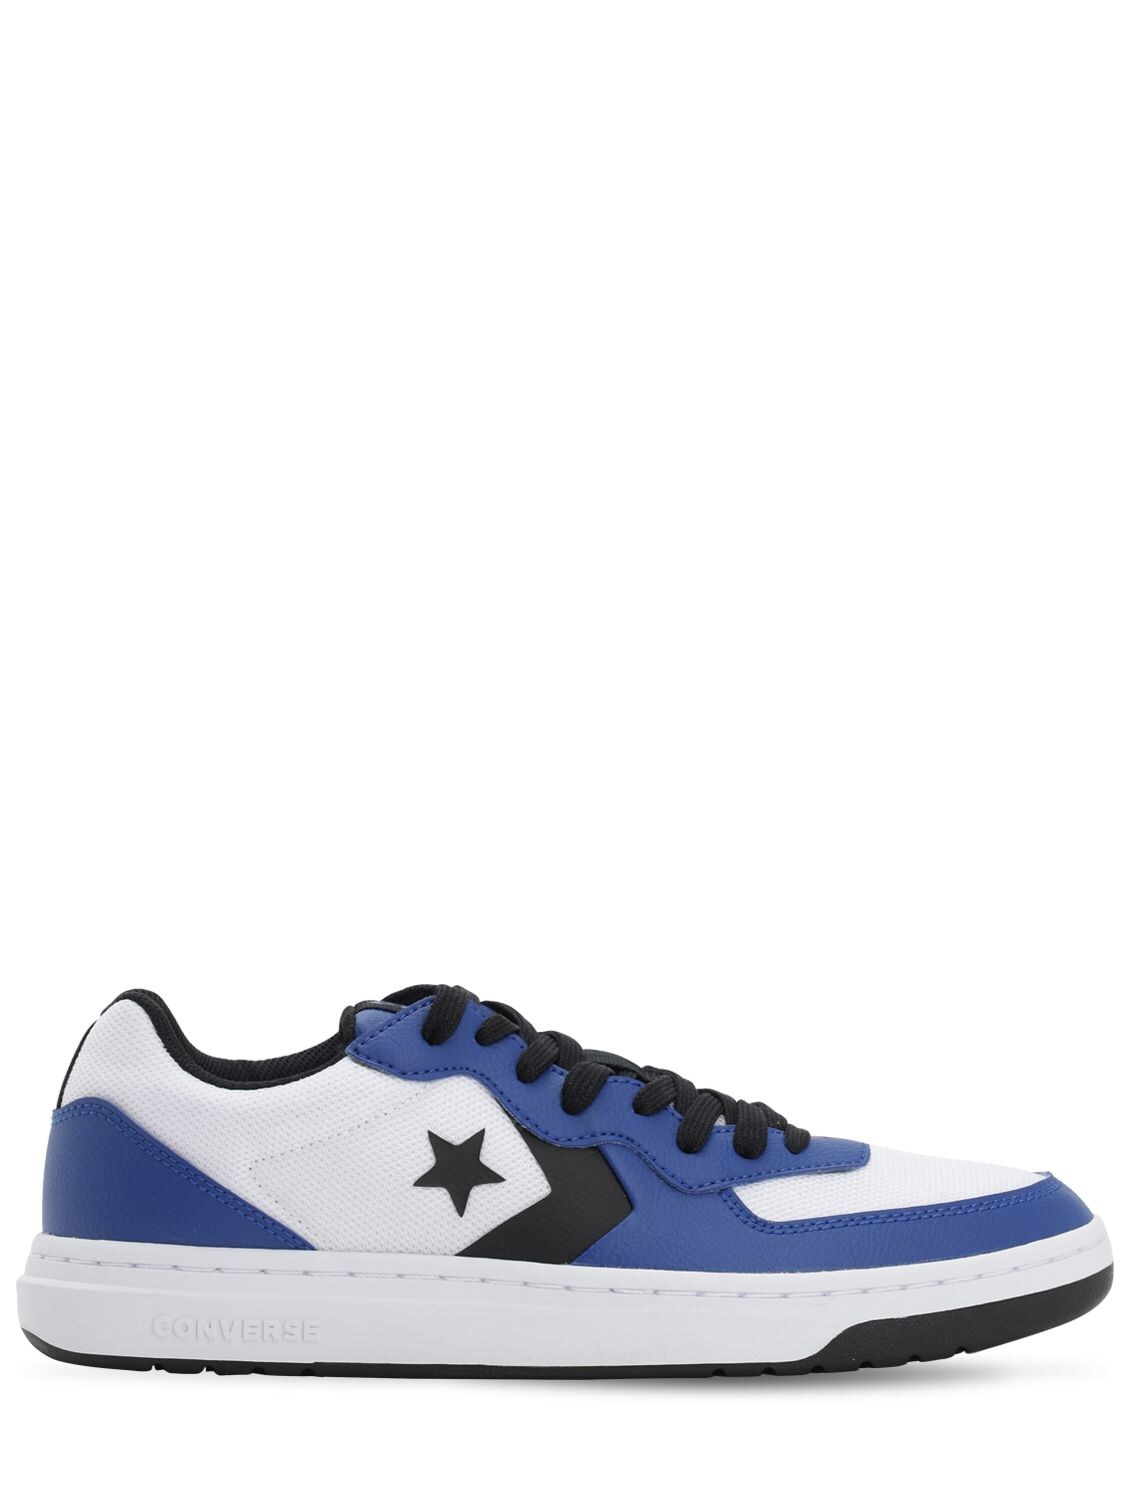 converse white and blue